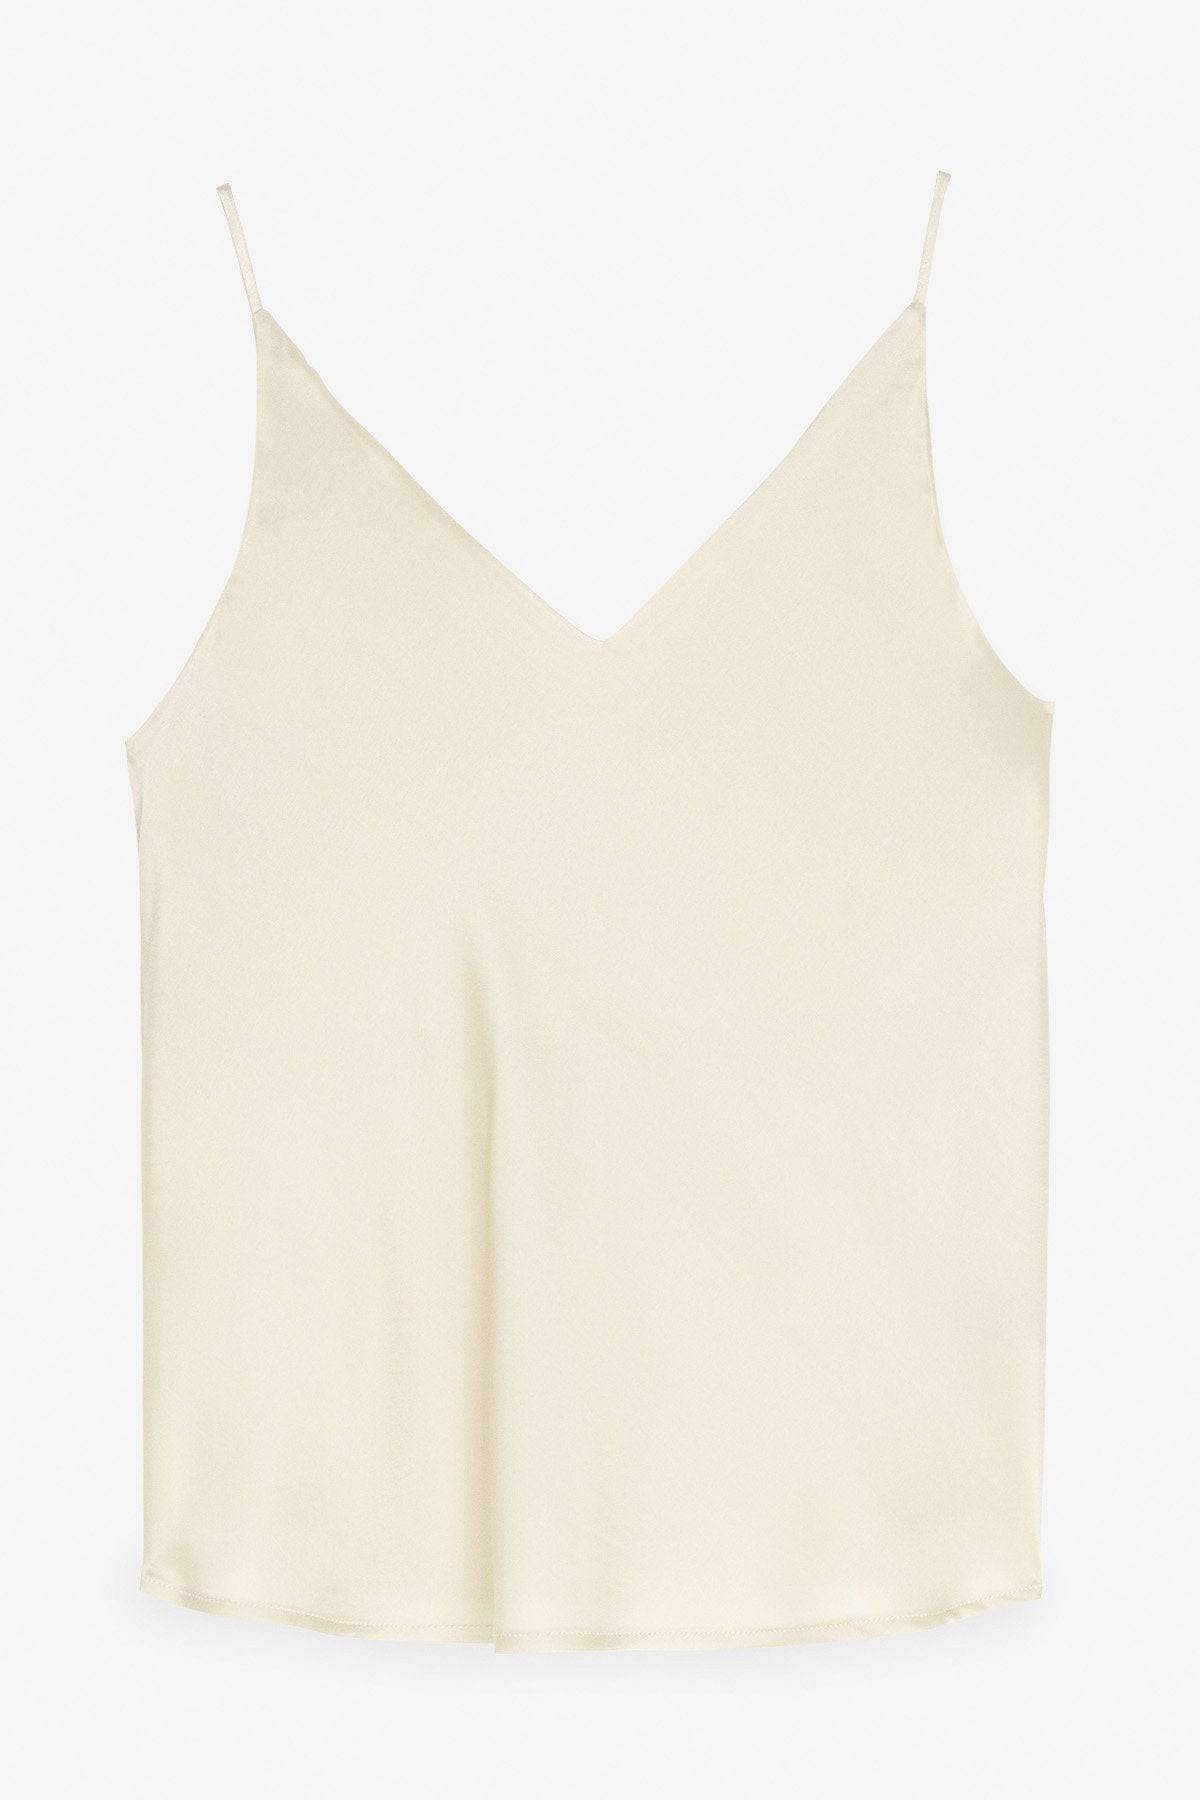 V Neck Camisole in Vanilla for sale - Woodcock and Cavendish